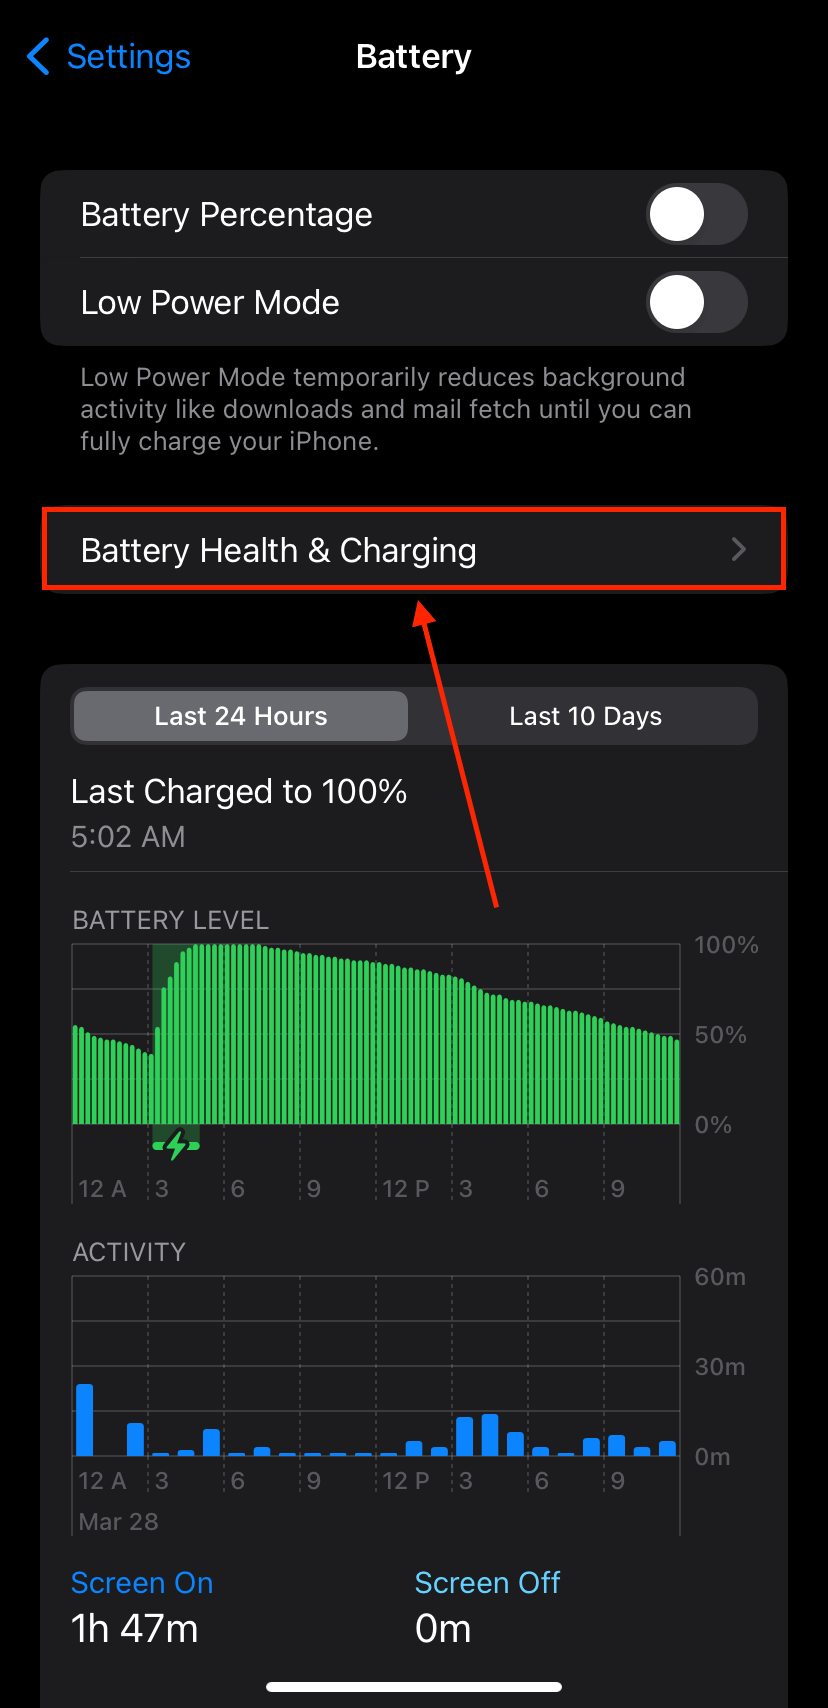 Battery Health & Charging button in iPhone Settings